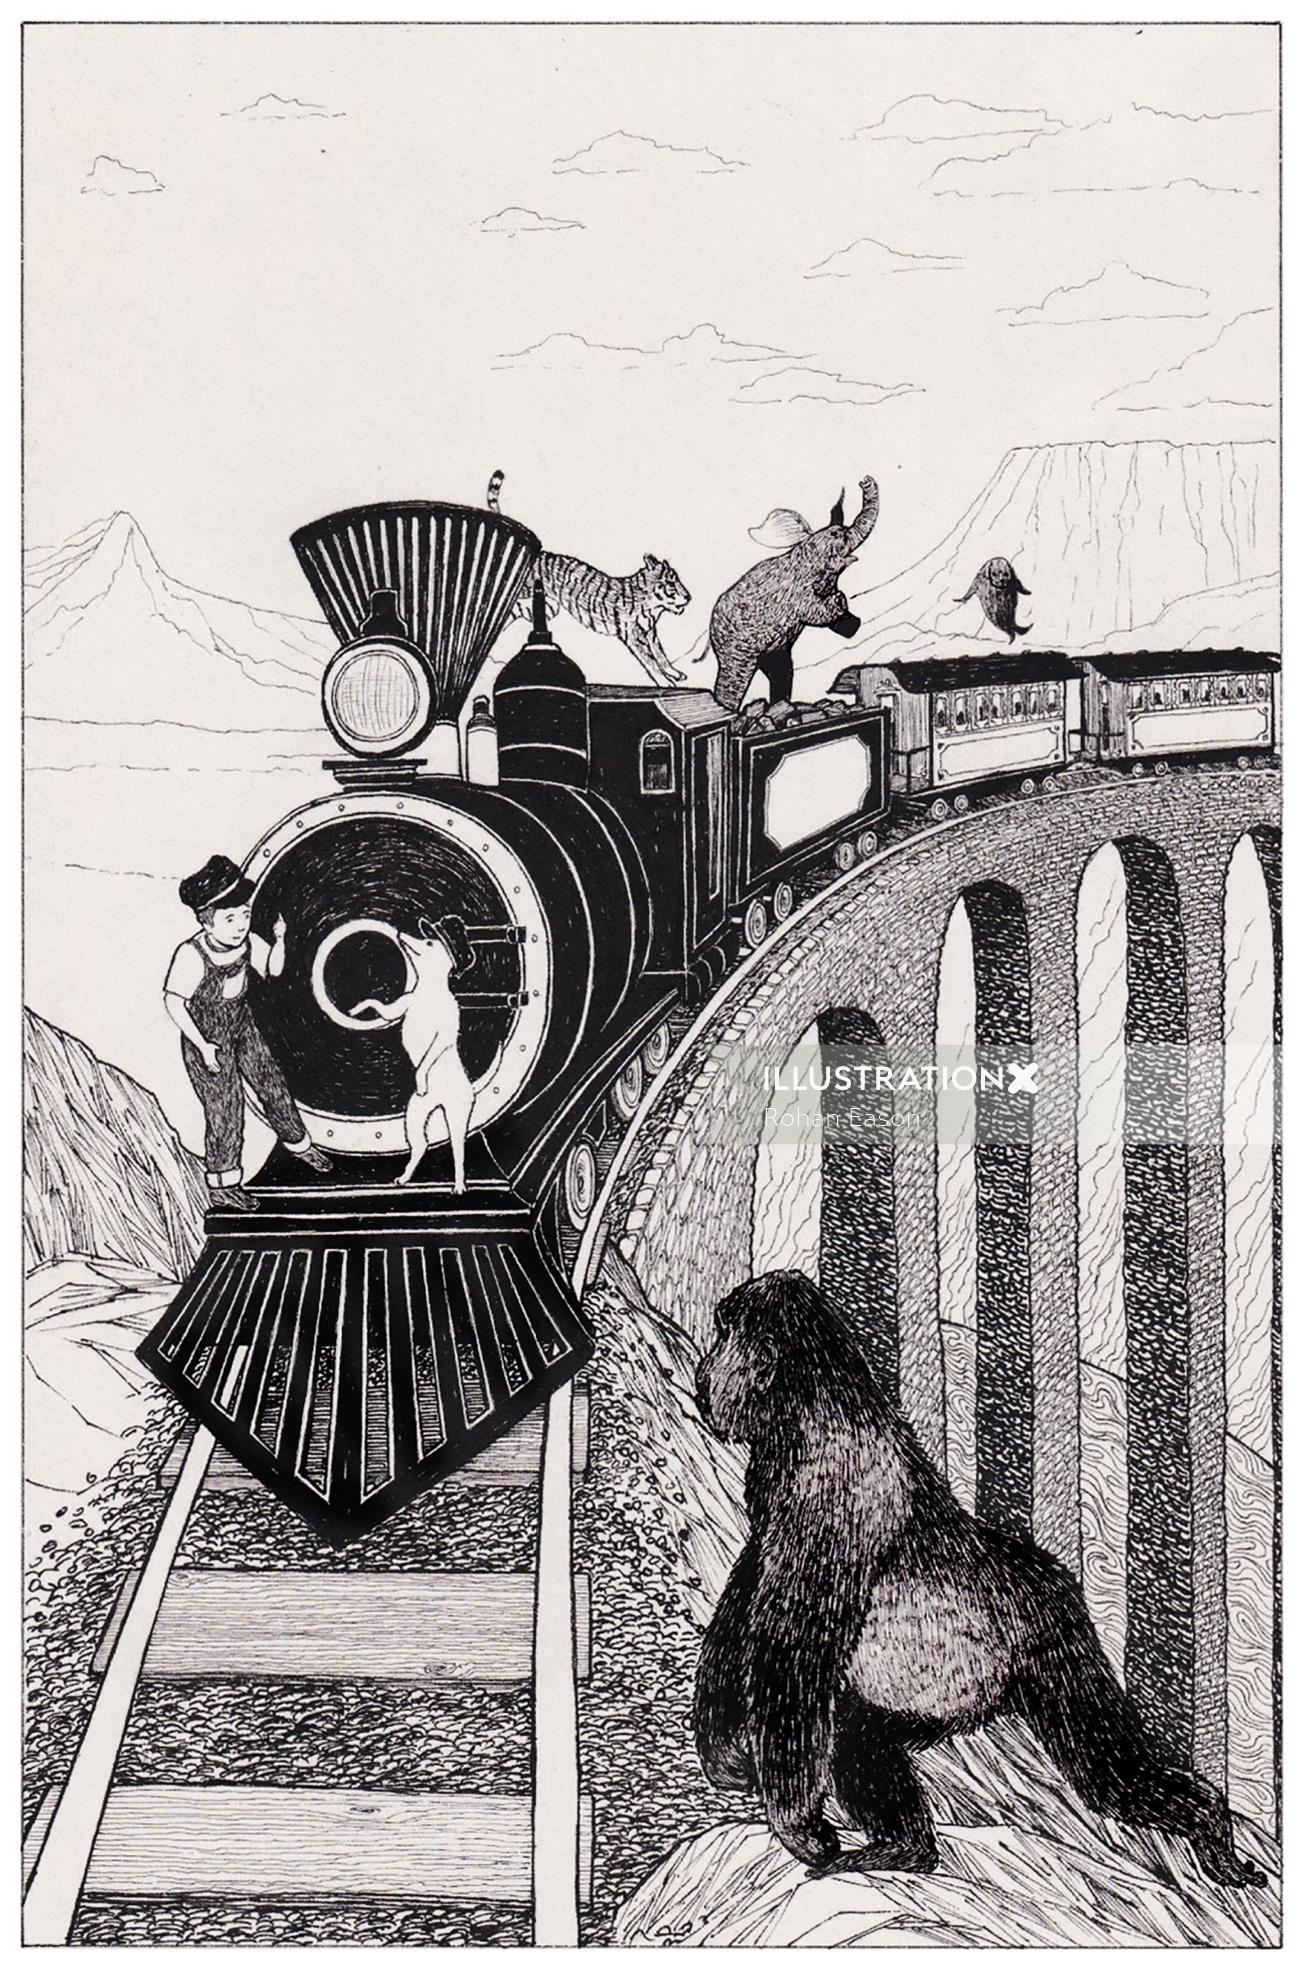 Kid and animals playing on a moving train by Rohan Eason